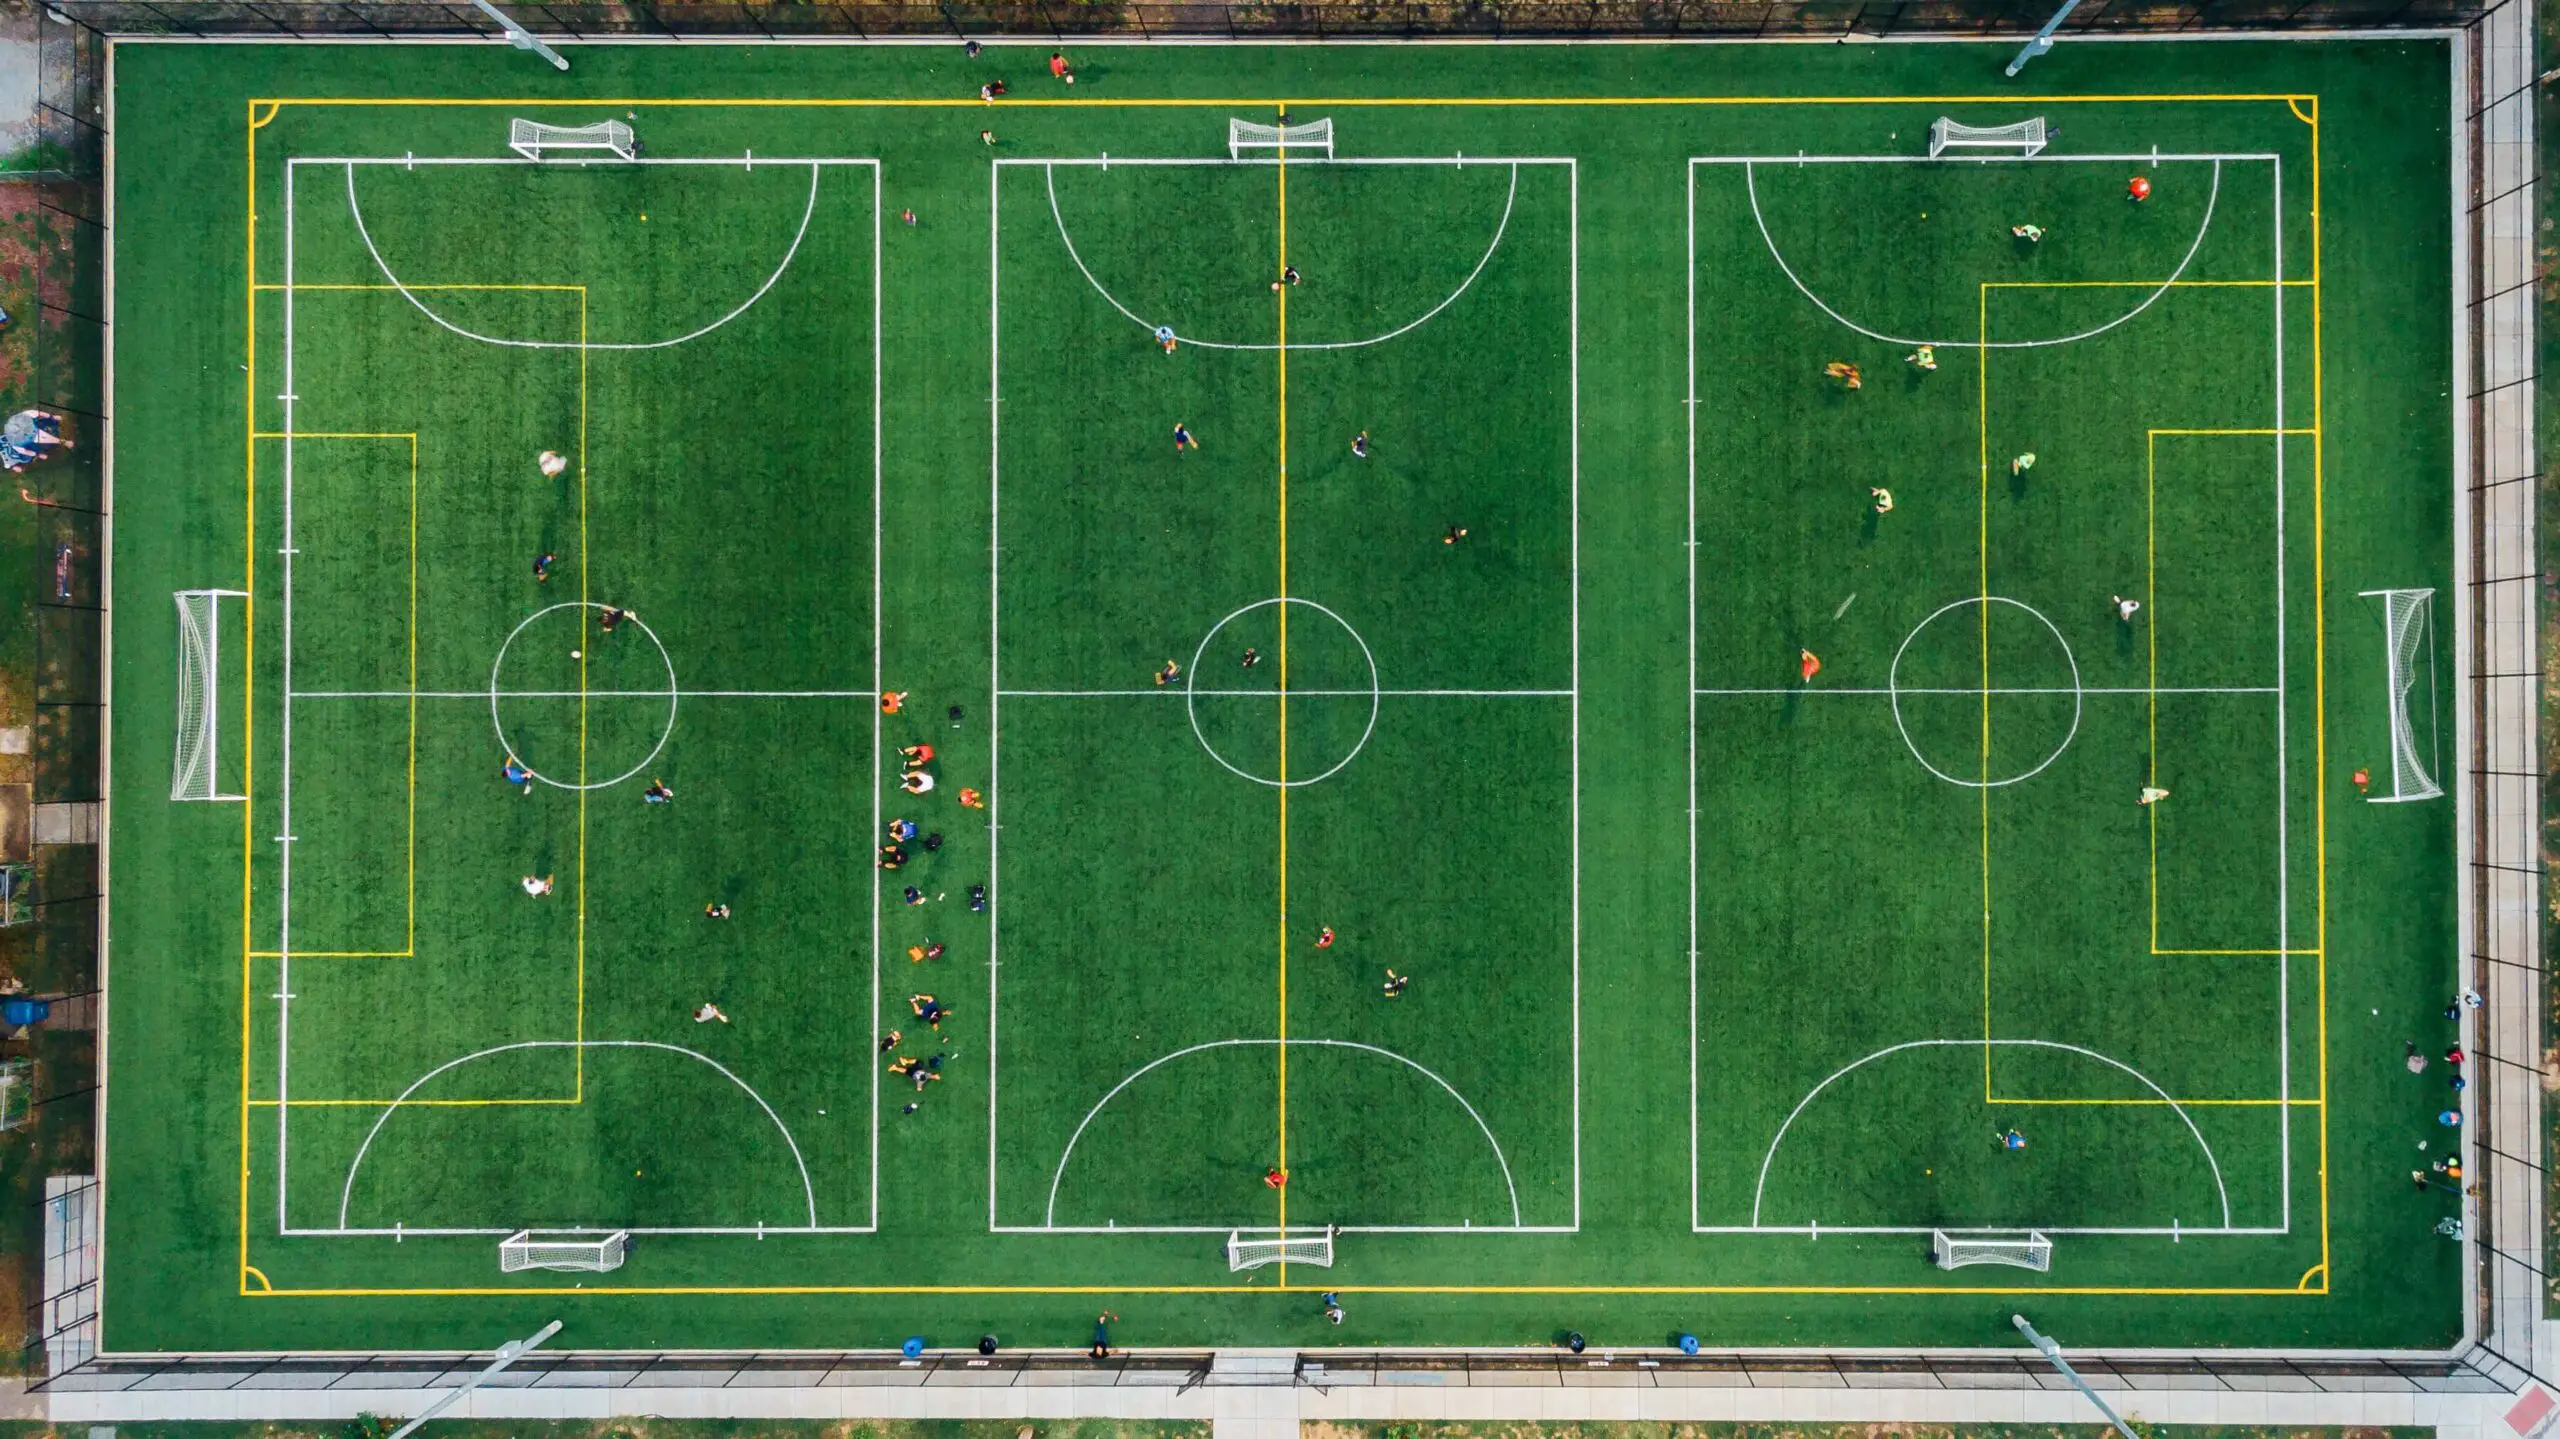 Soccer field with 3 small fields